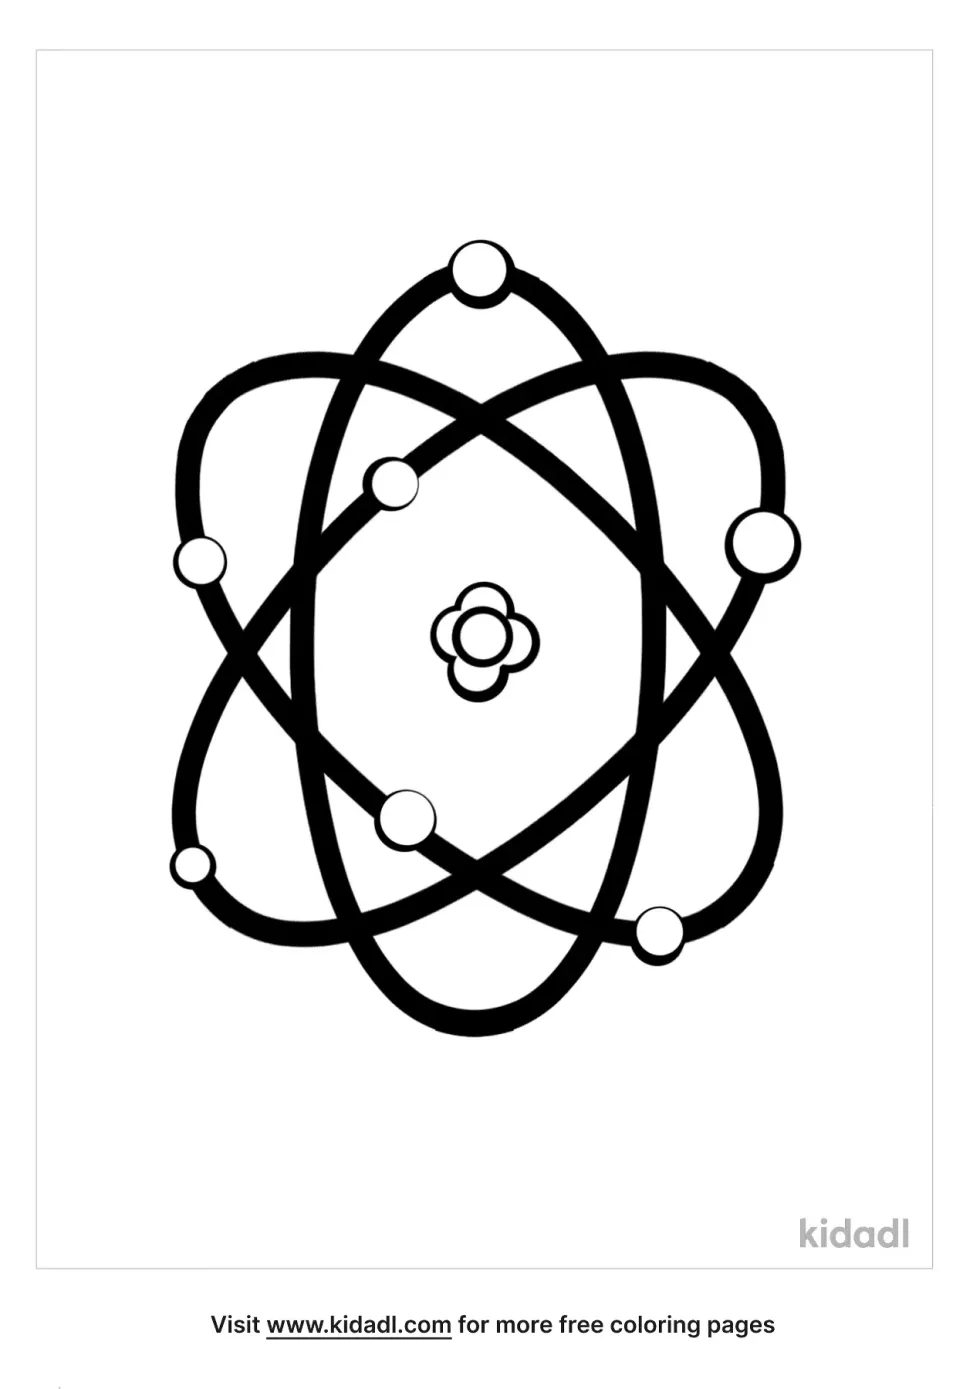 Atom Coloring Page